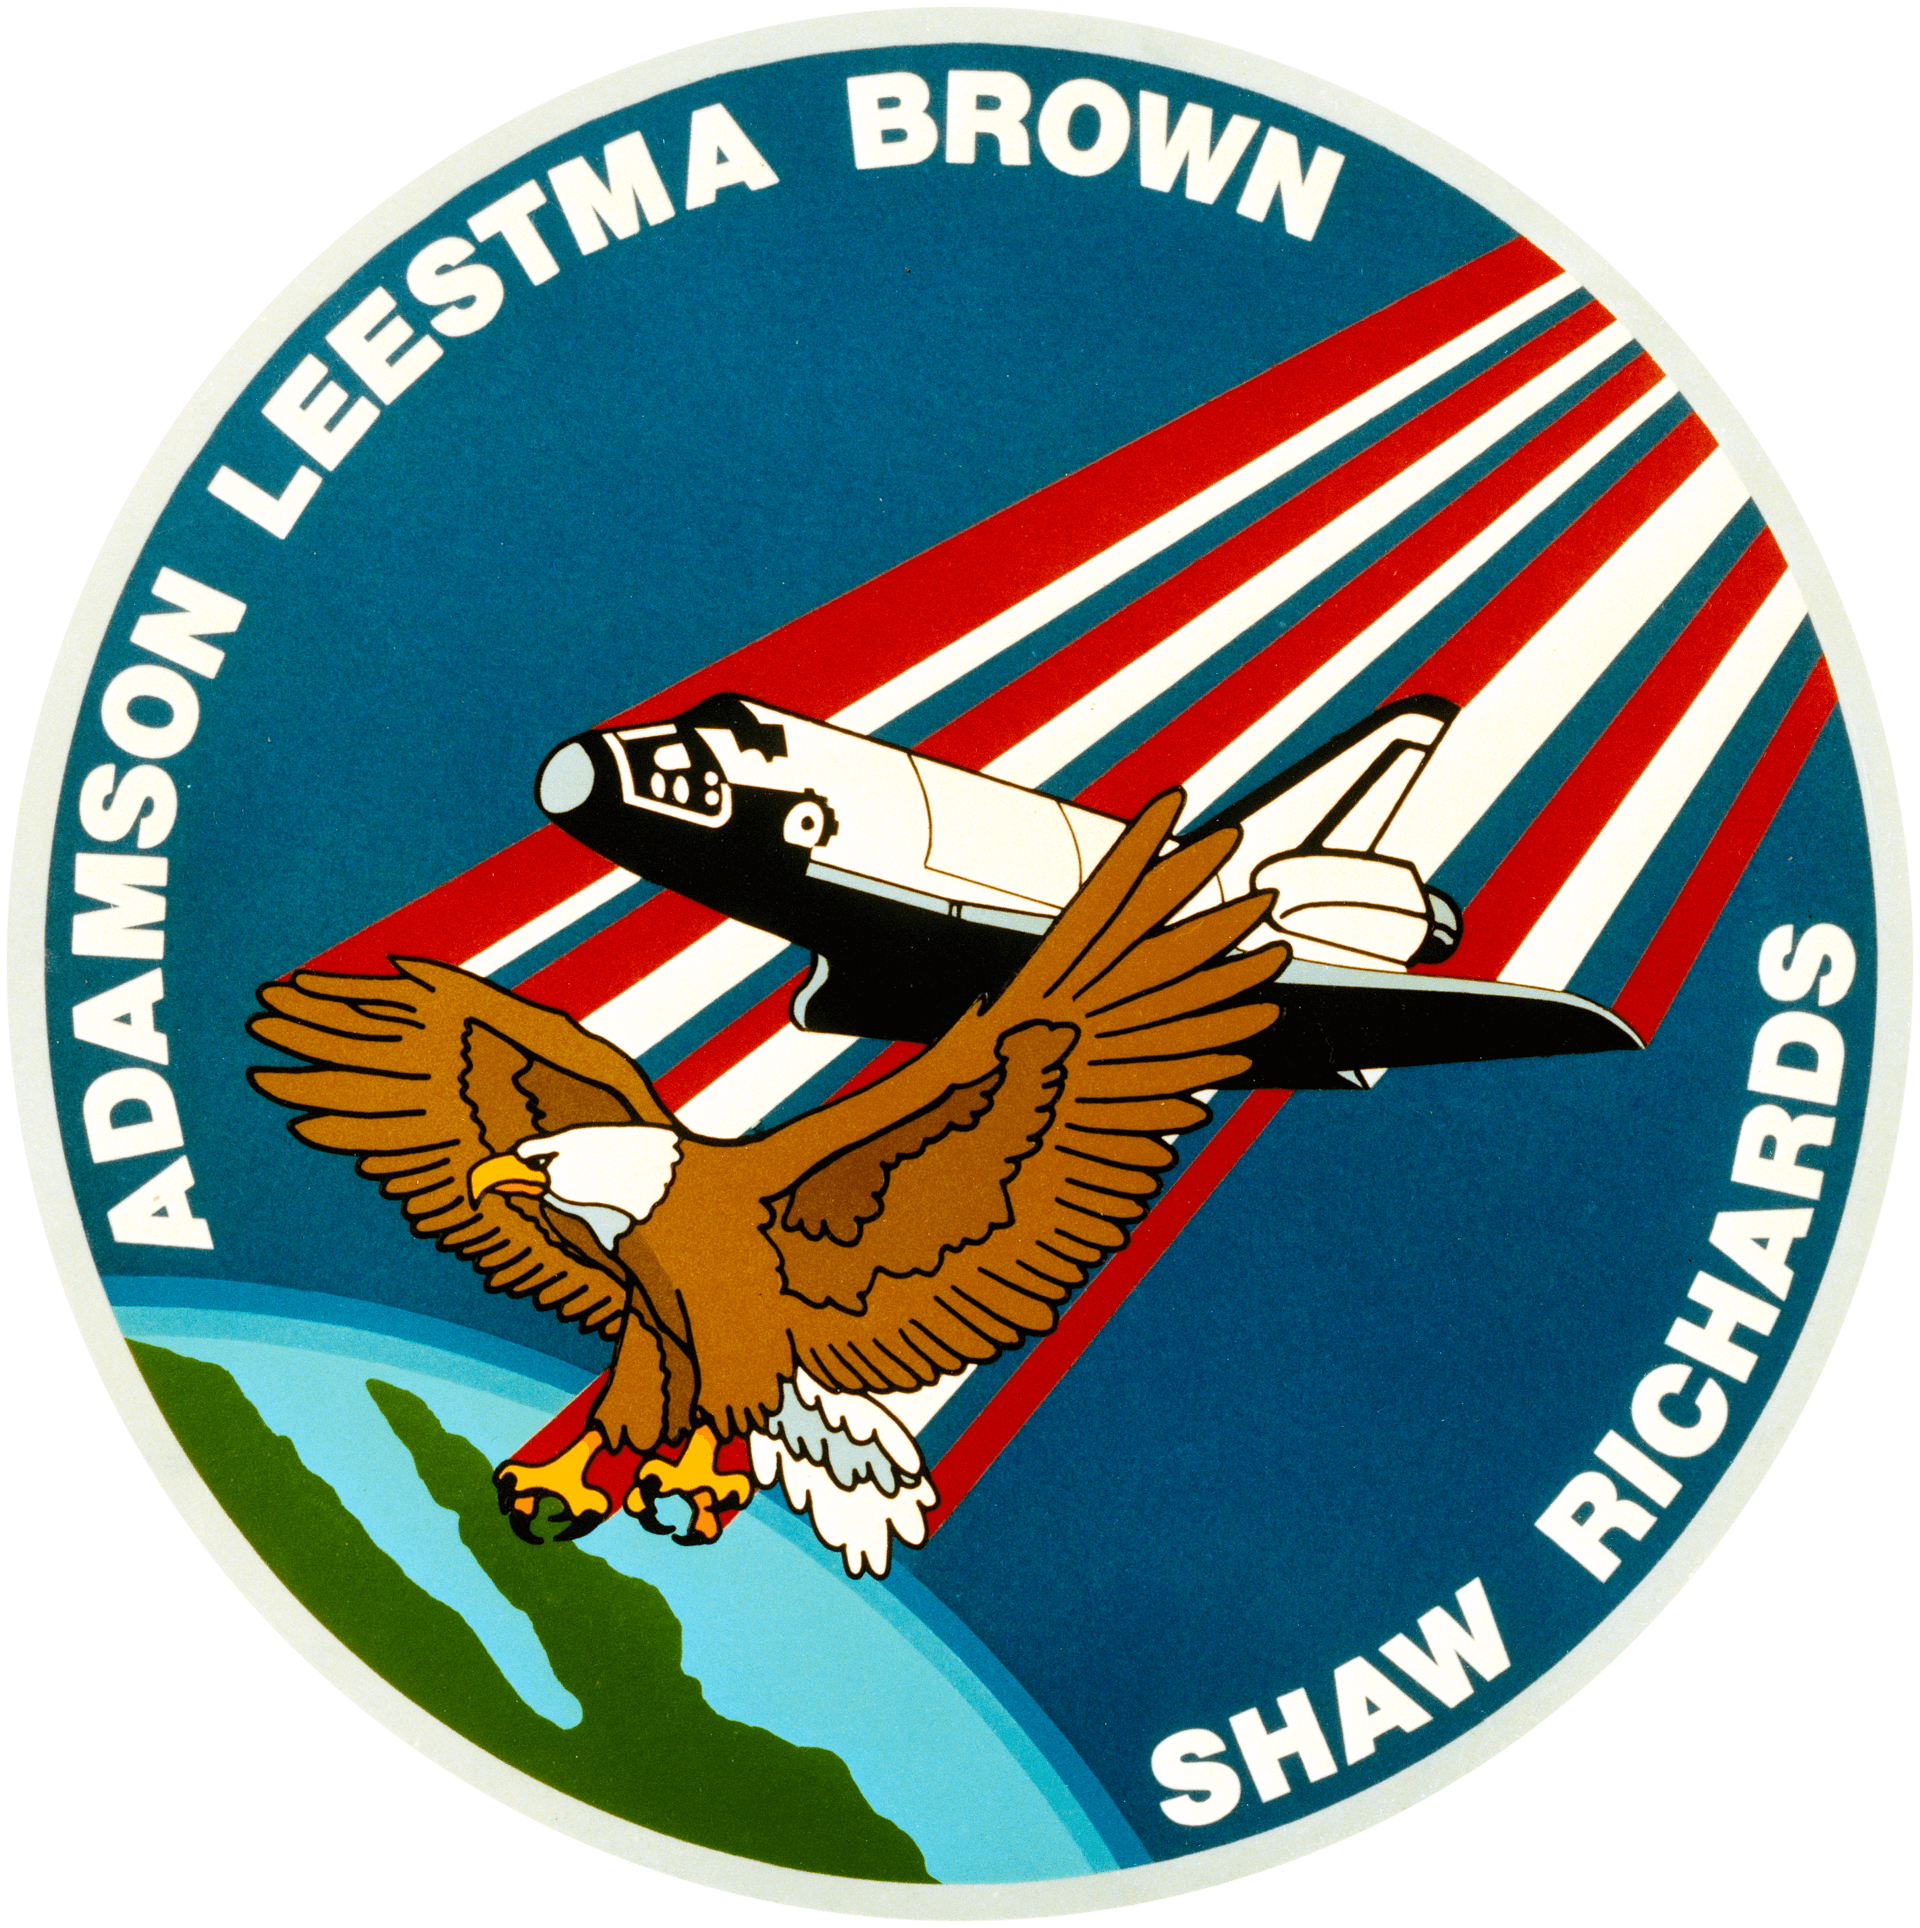 Mission patch for STS-28